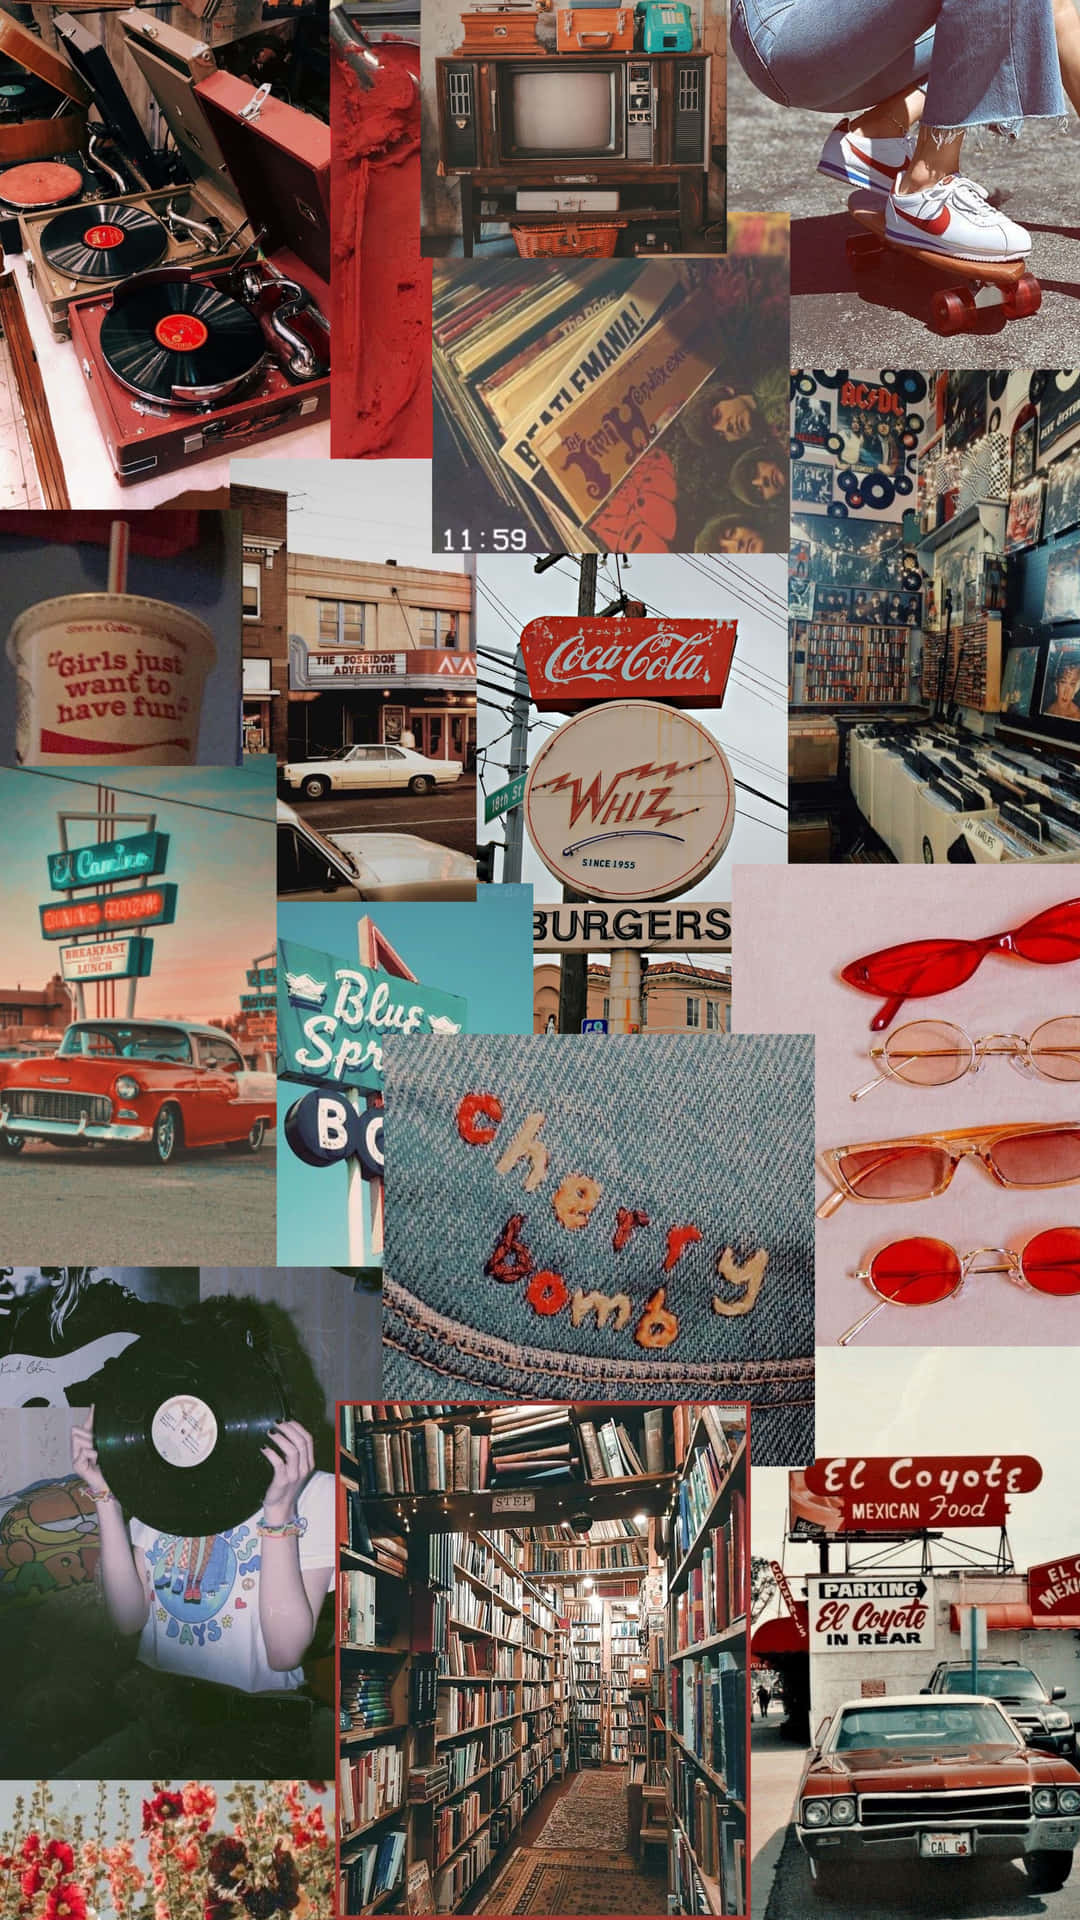 A collage of images from the 1950s, including a burger sign, a jukebox, a car, and a library. - 50s